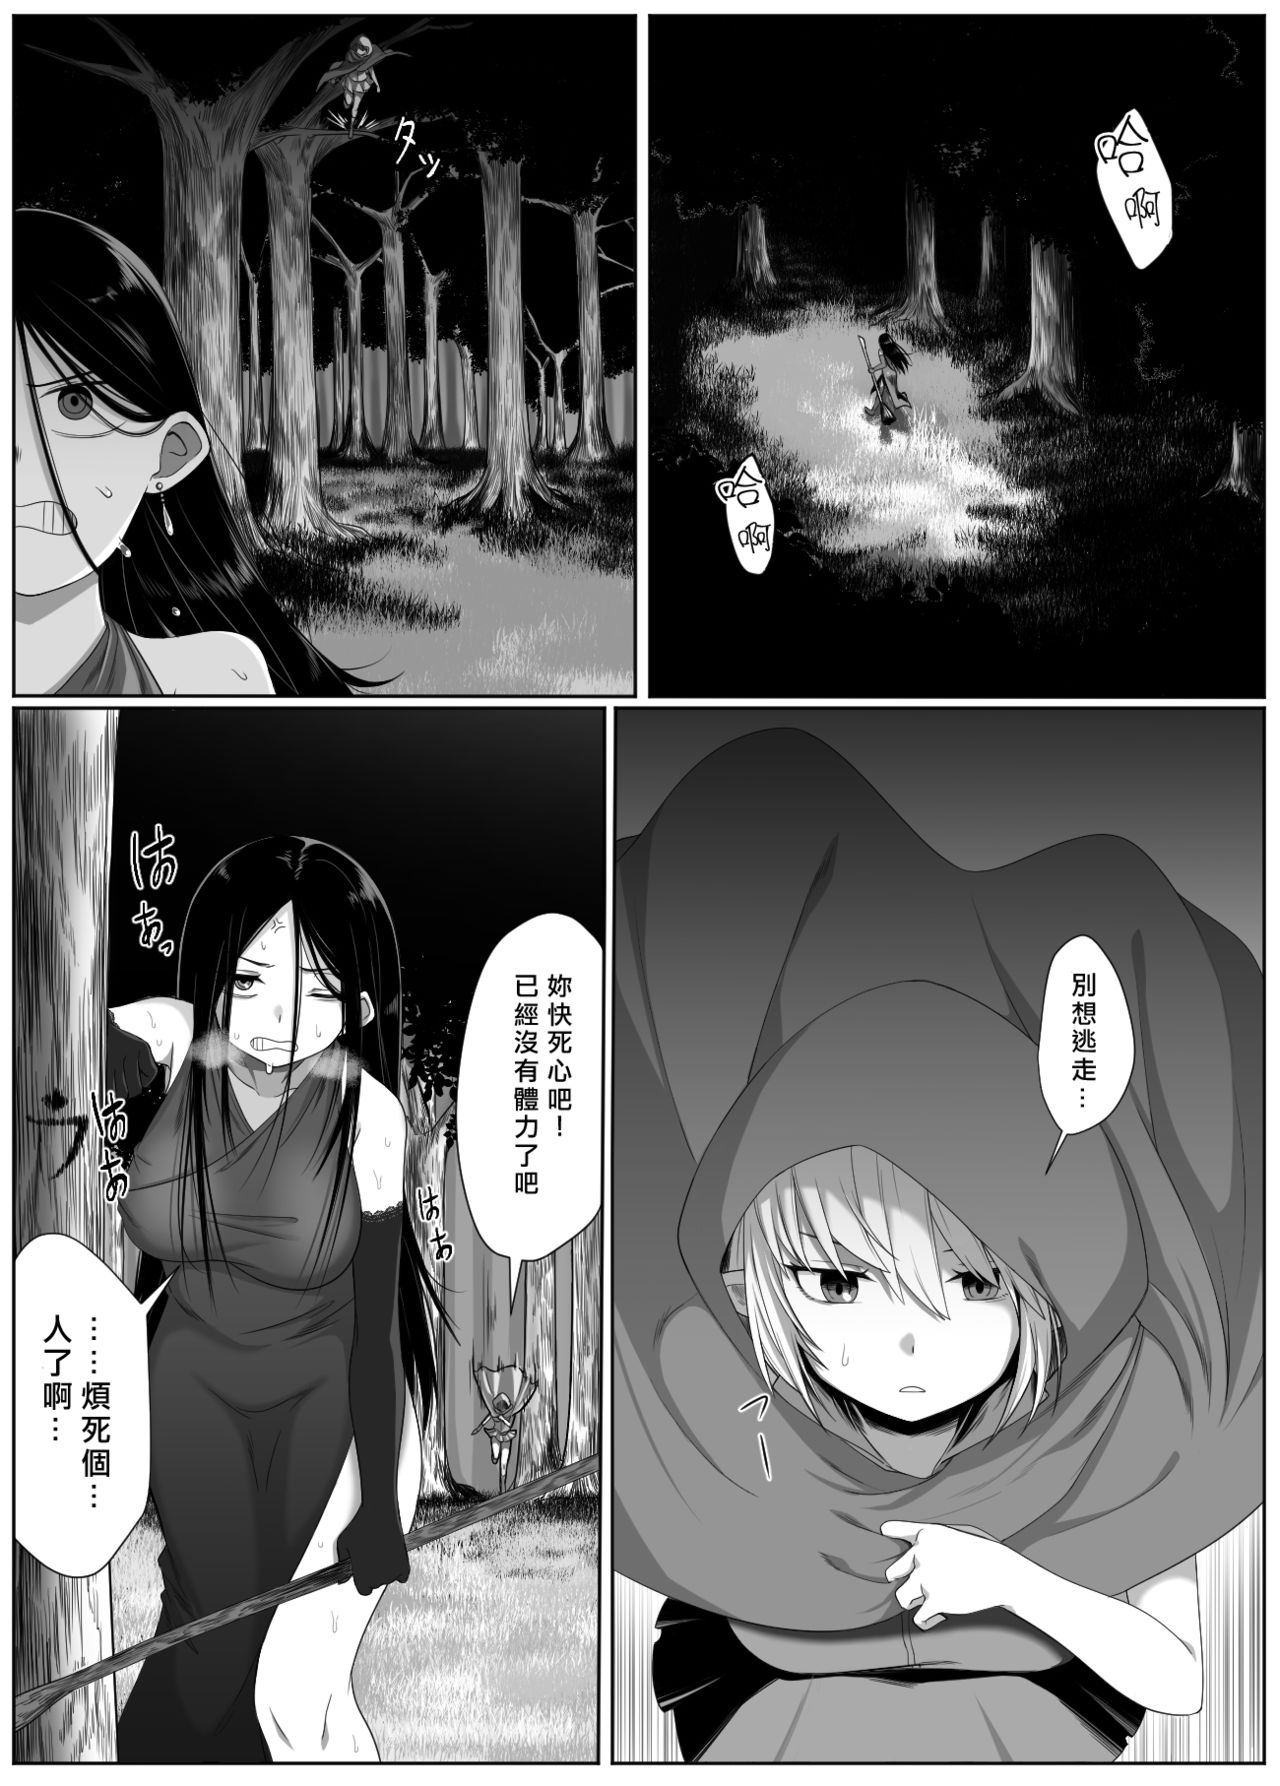 [Doukyara Doukoukai (Xion)] Selfcest in the Forest [Chinese] [矢来夏洛个人汉化] [同キャラ同好会 (Xion)] SELFCEST IN THE FOREST [中国翻訳]